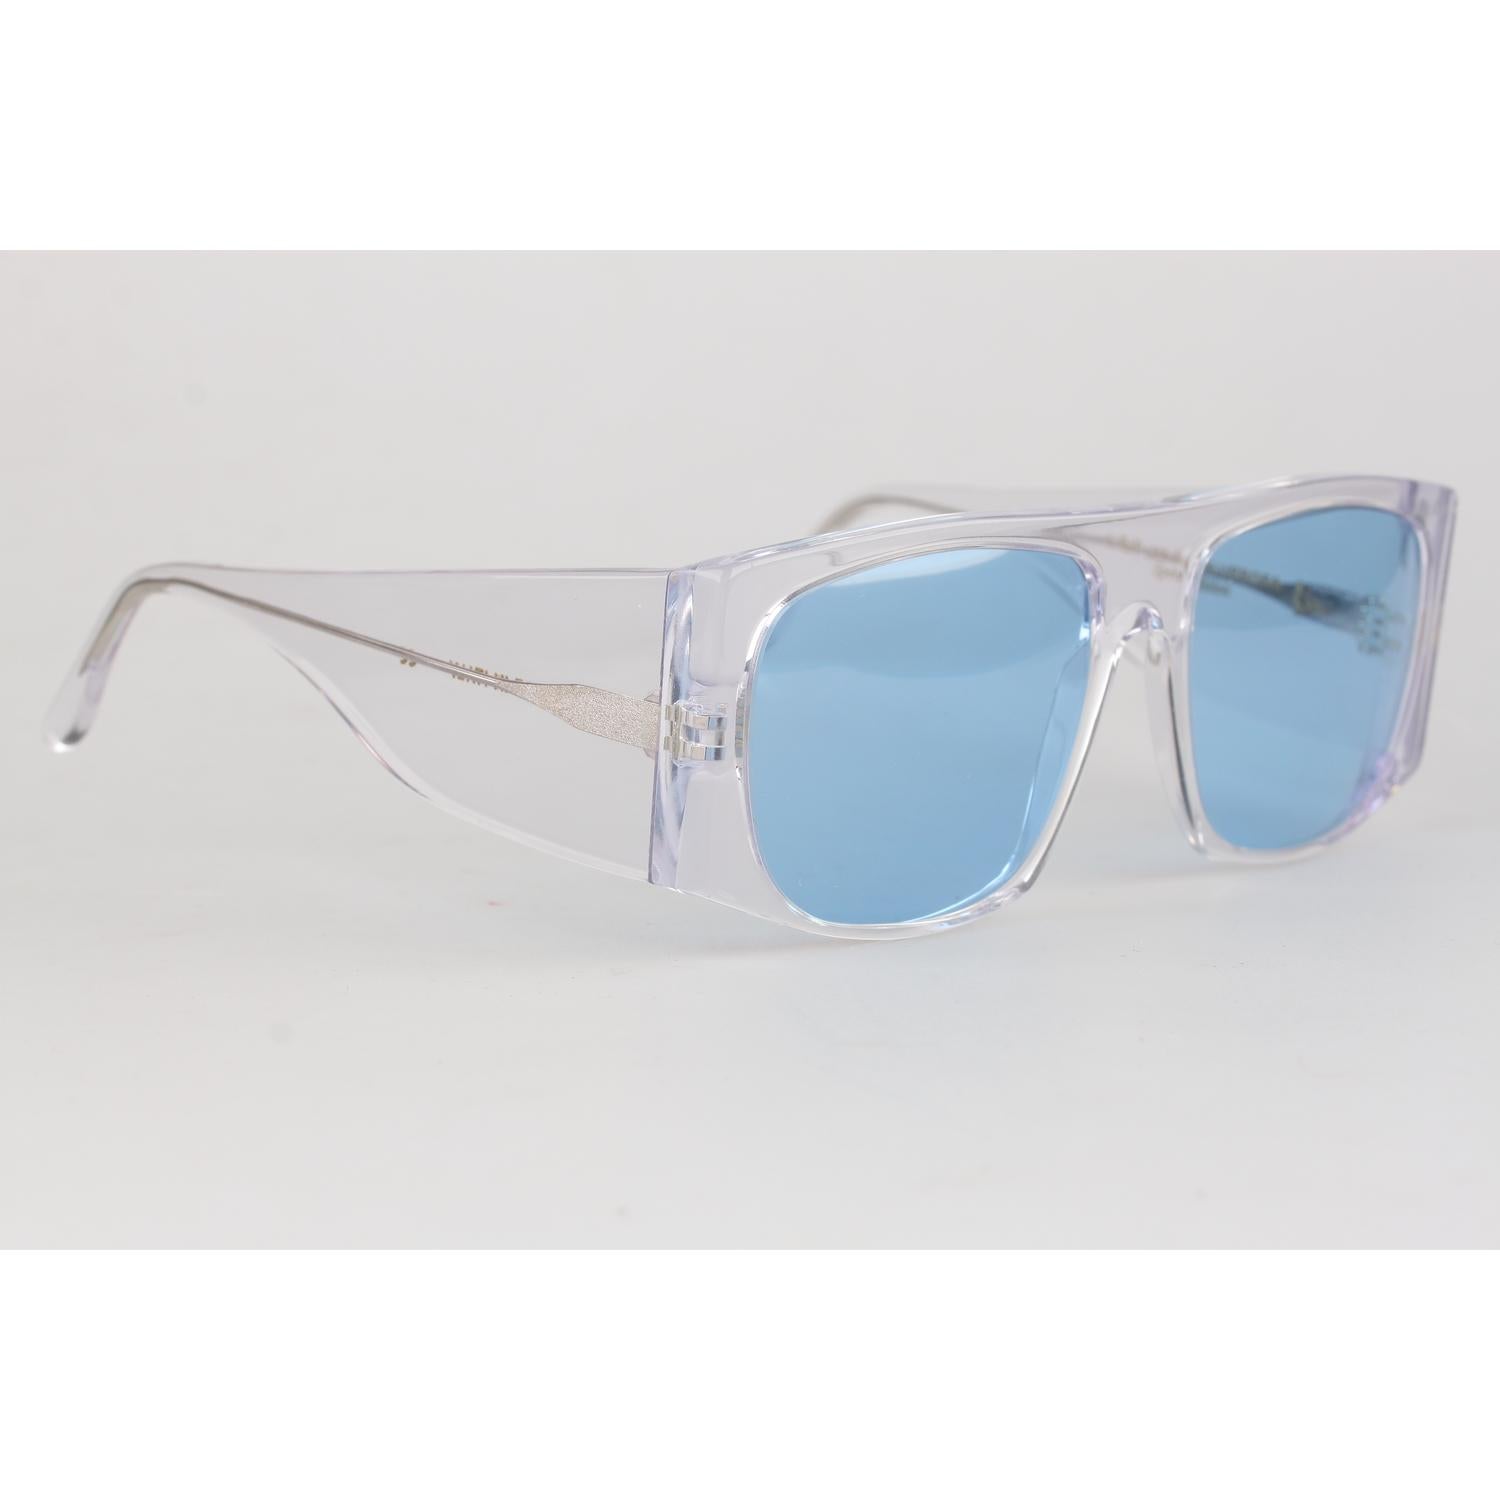 MATERIAL: Acetate

COLOR: Clear

MODEL:

GENDER: Adult Unisex

SIZE:

COUNTRY OF MANUFACTURE: Italy

Condition
CONDITION DETAILS:

NEW OLD STOCK - Never worn or used - they will come with their LGR case.

Measurements
MEASUREMENTS:

TEMPLE MAX.